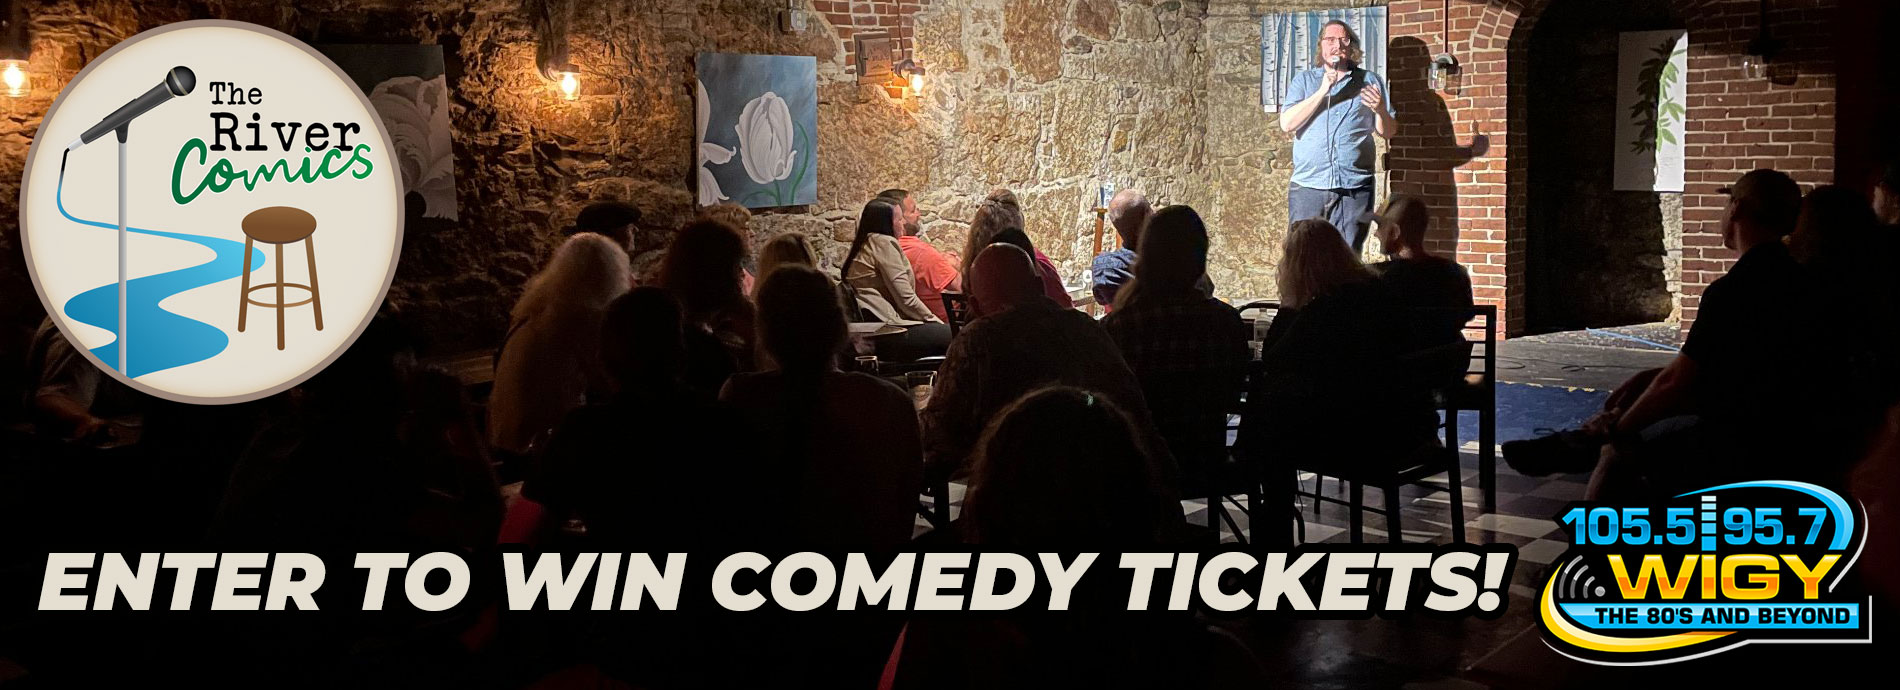 Enter to Win Comedy Tickets with WIGY!